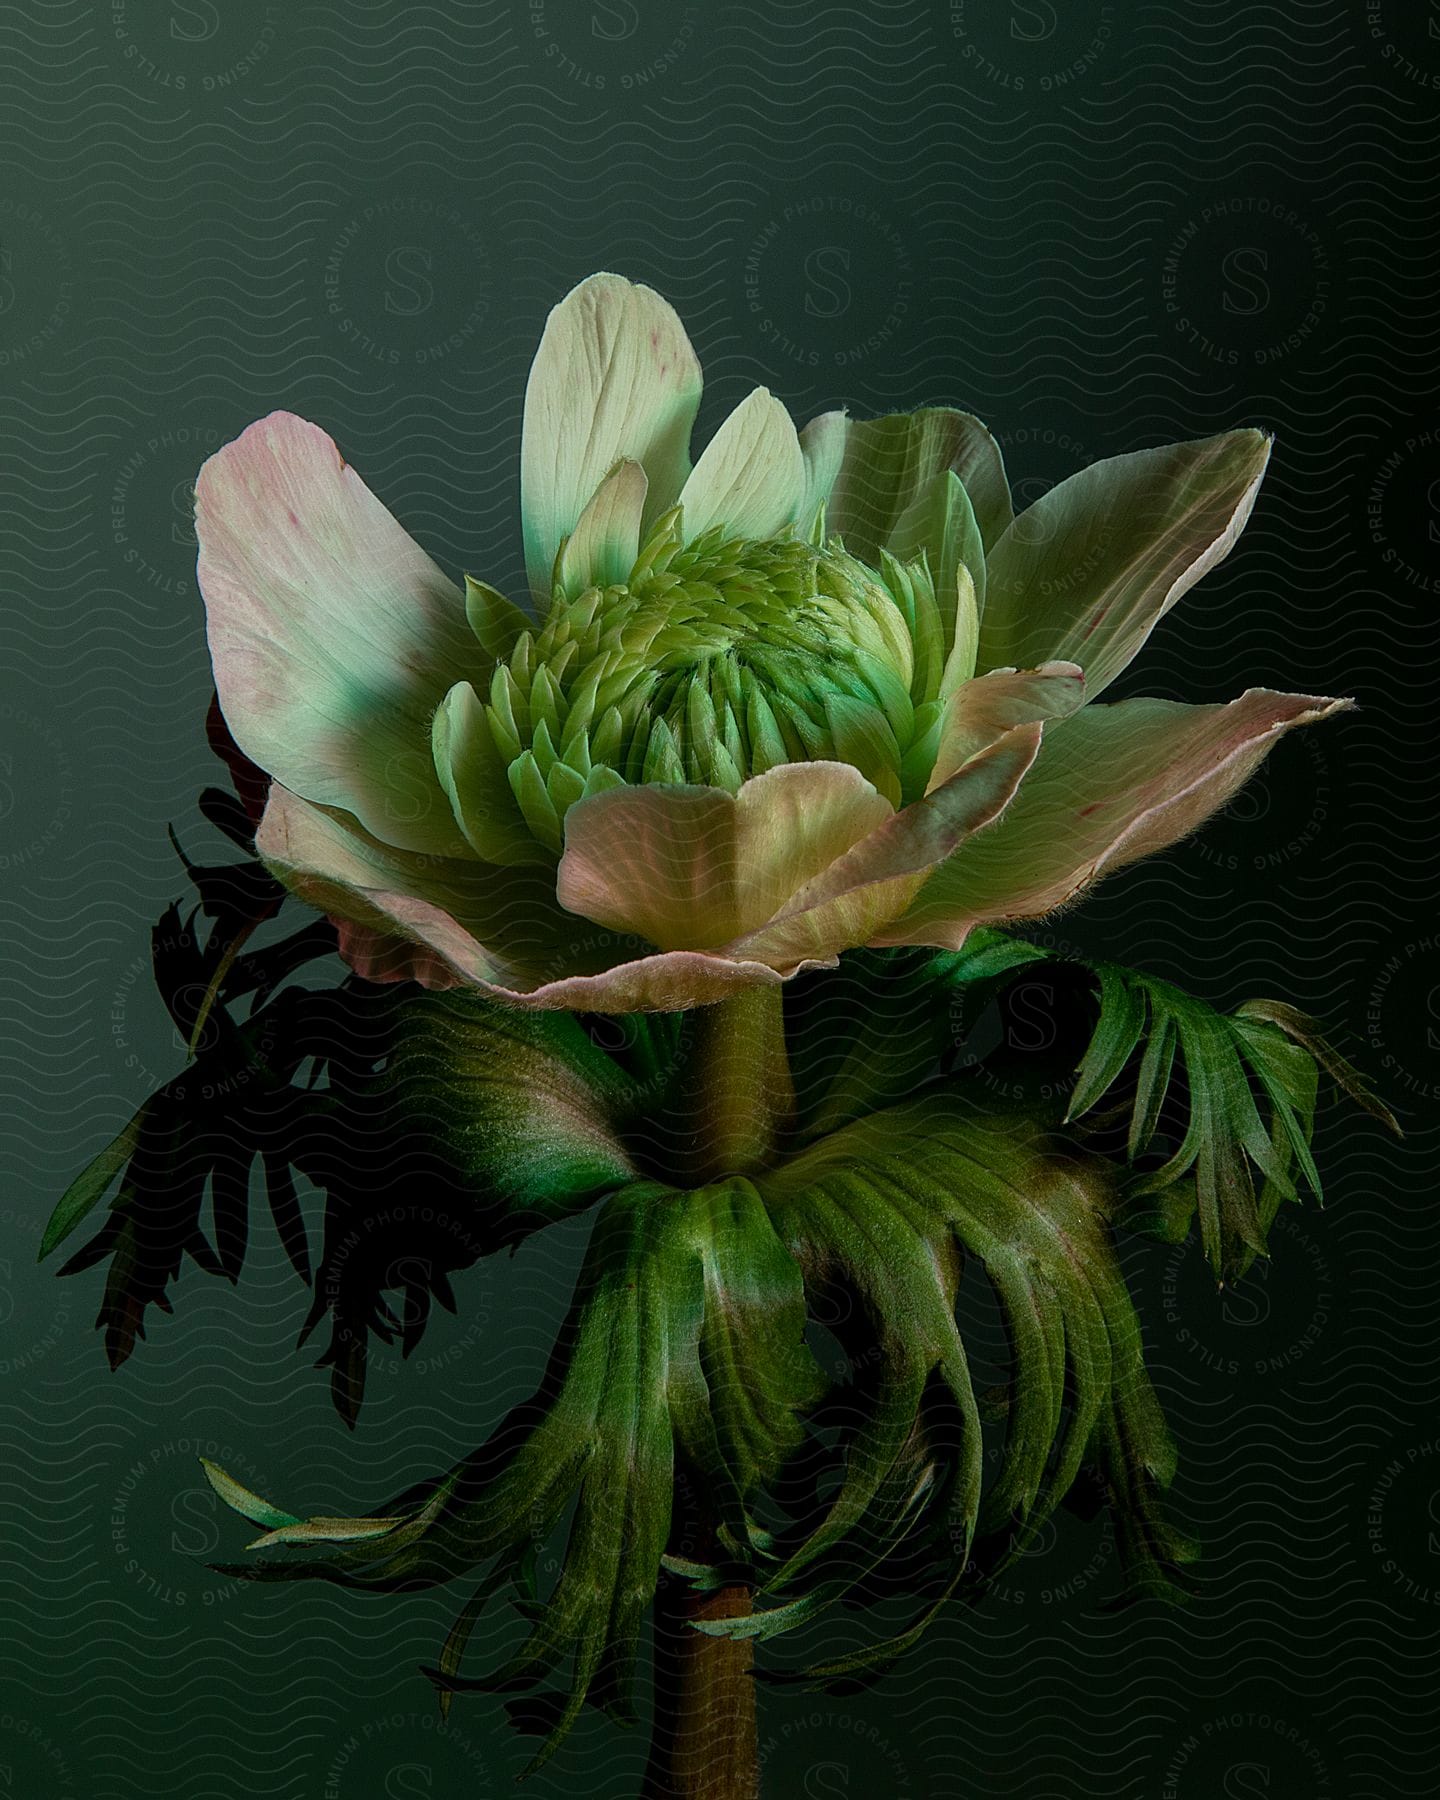 A green flower isolated against a dark background and the petals are opening, revealing a green colored center.